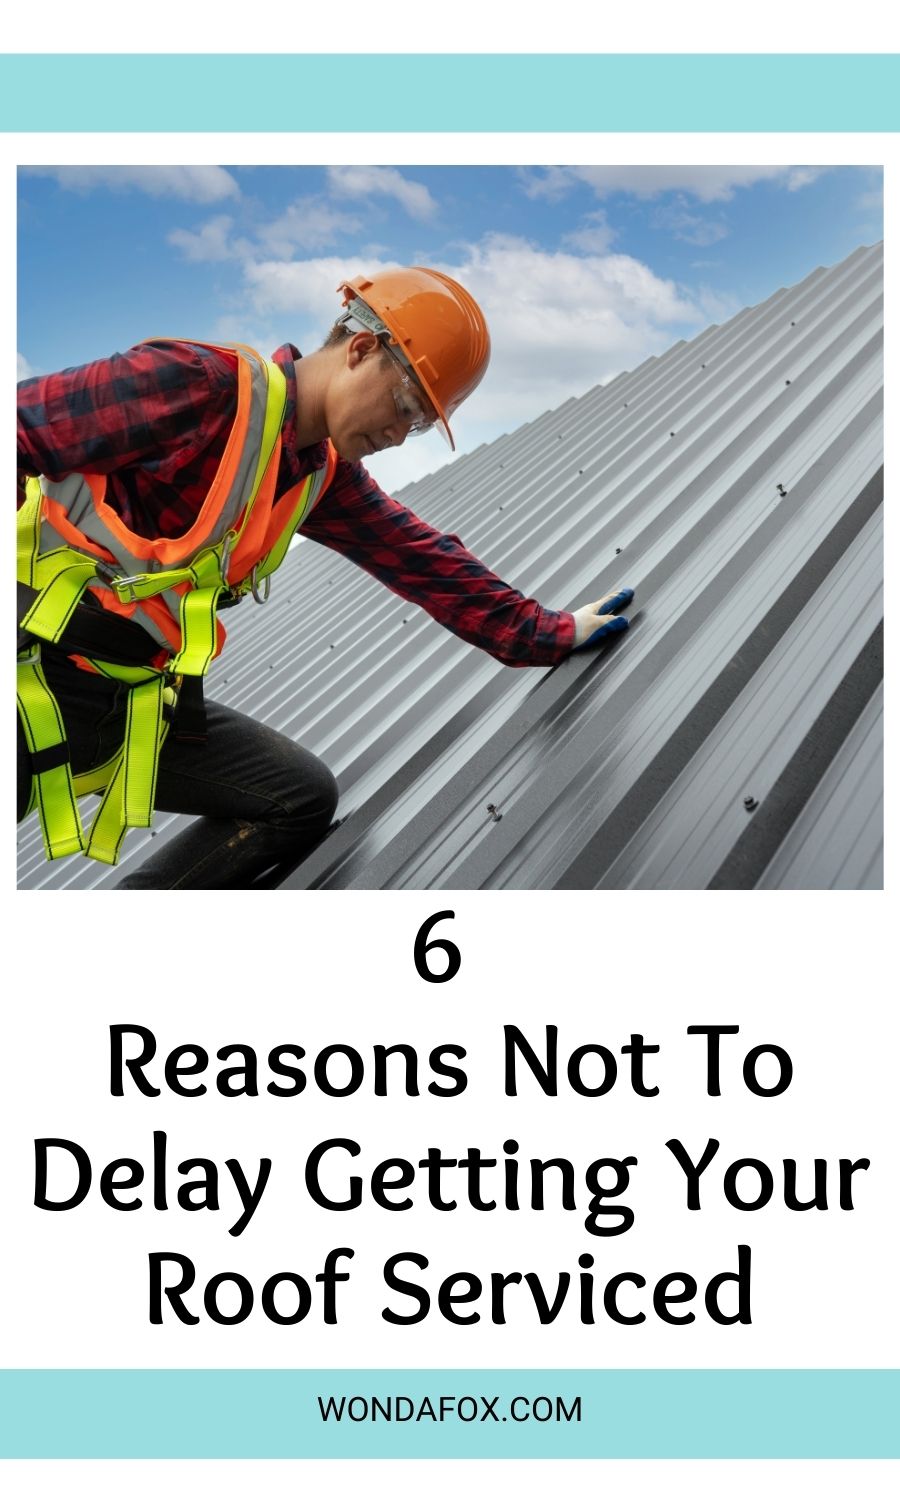 6 reasons not to delay getting your roof serviced